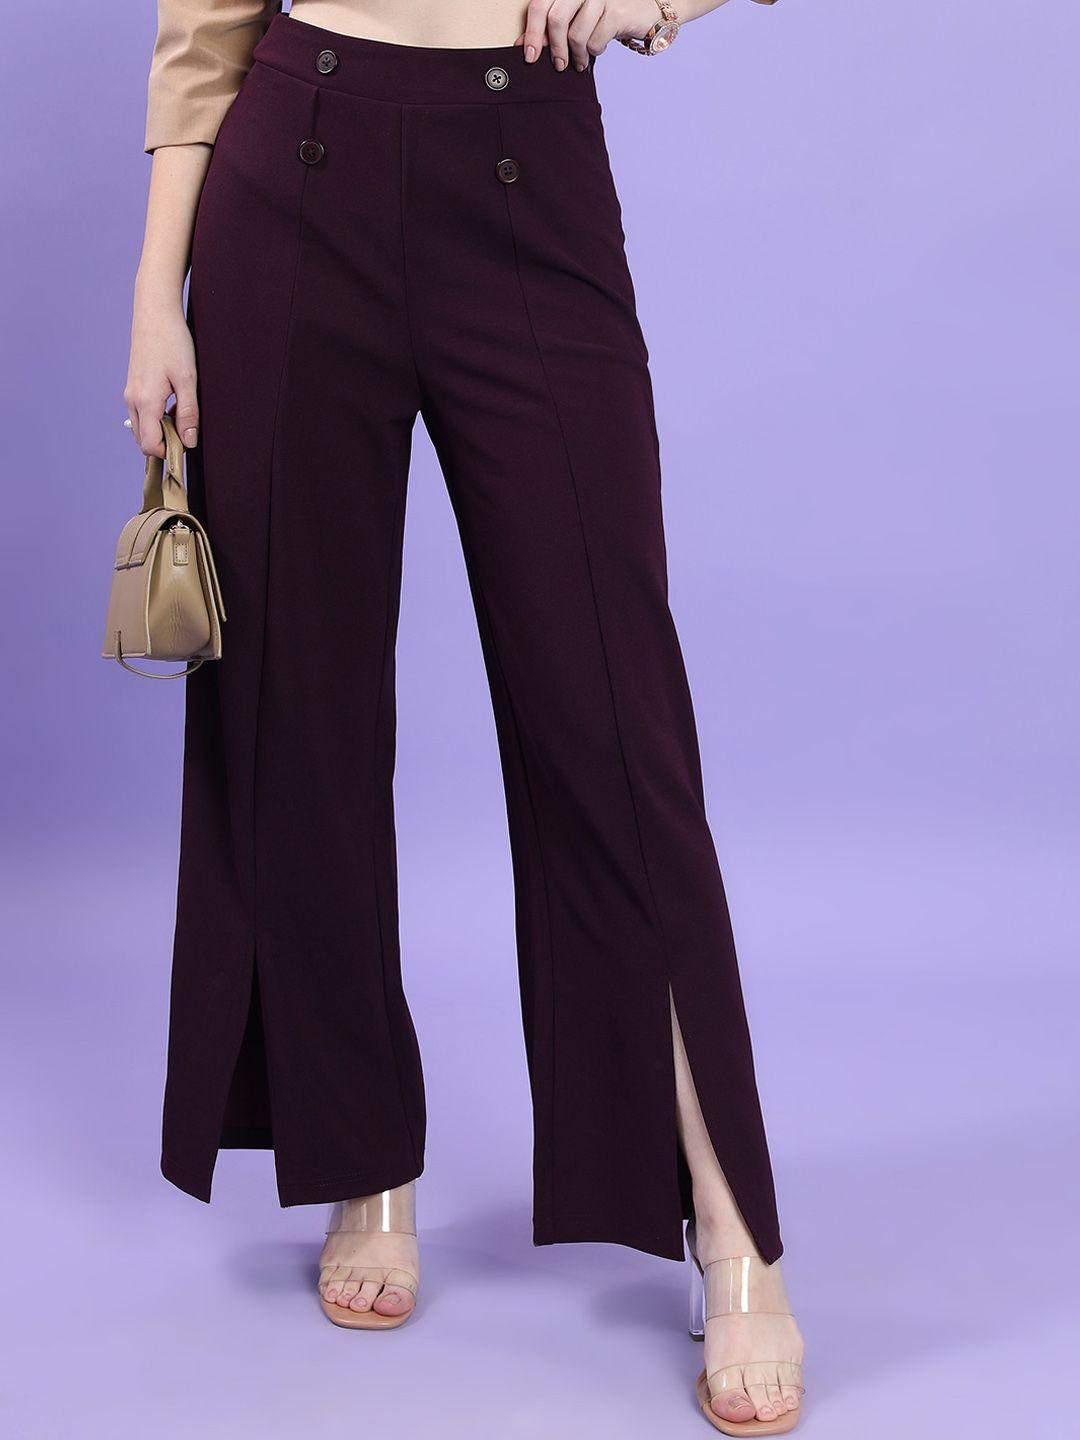 tokyo-talkies-women-high-rise-flared-parallel-trousers